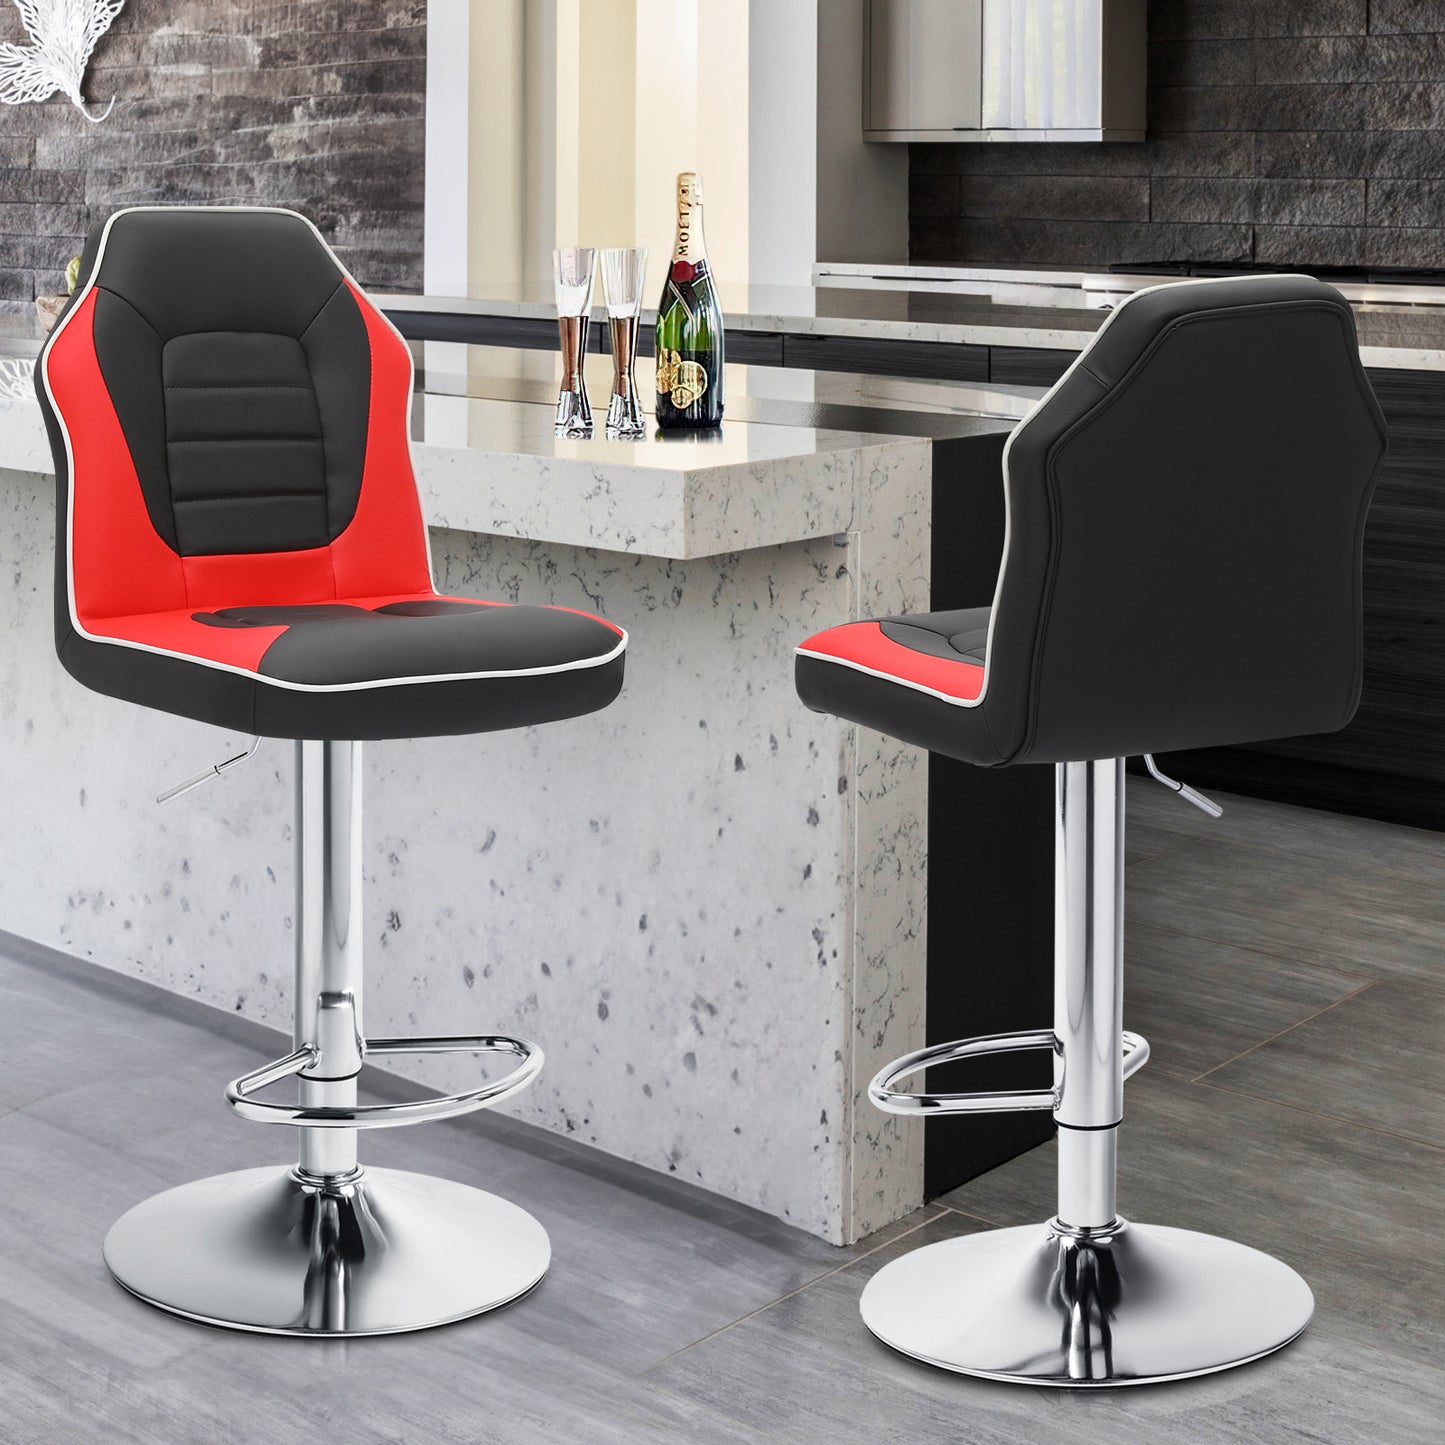 Set of 2 Modern Bar Stools Adjustable Swivel Leather Seat Gaming Chair Style